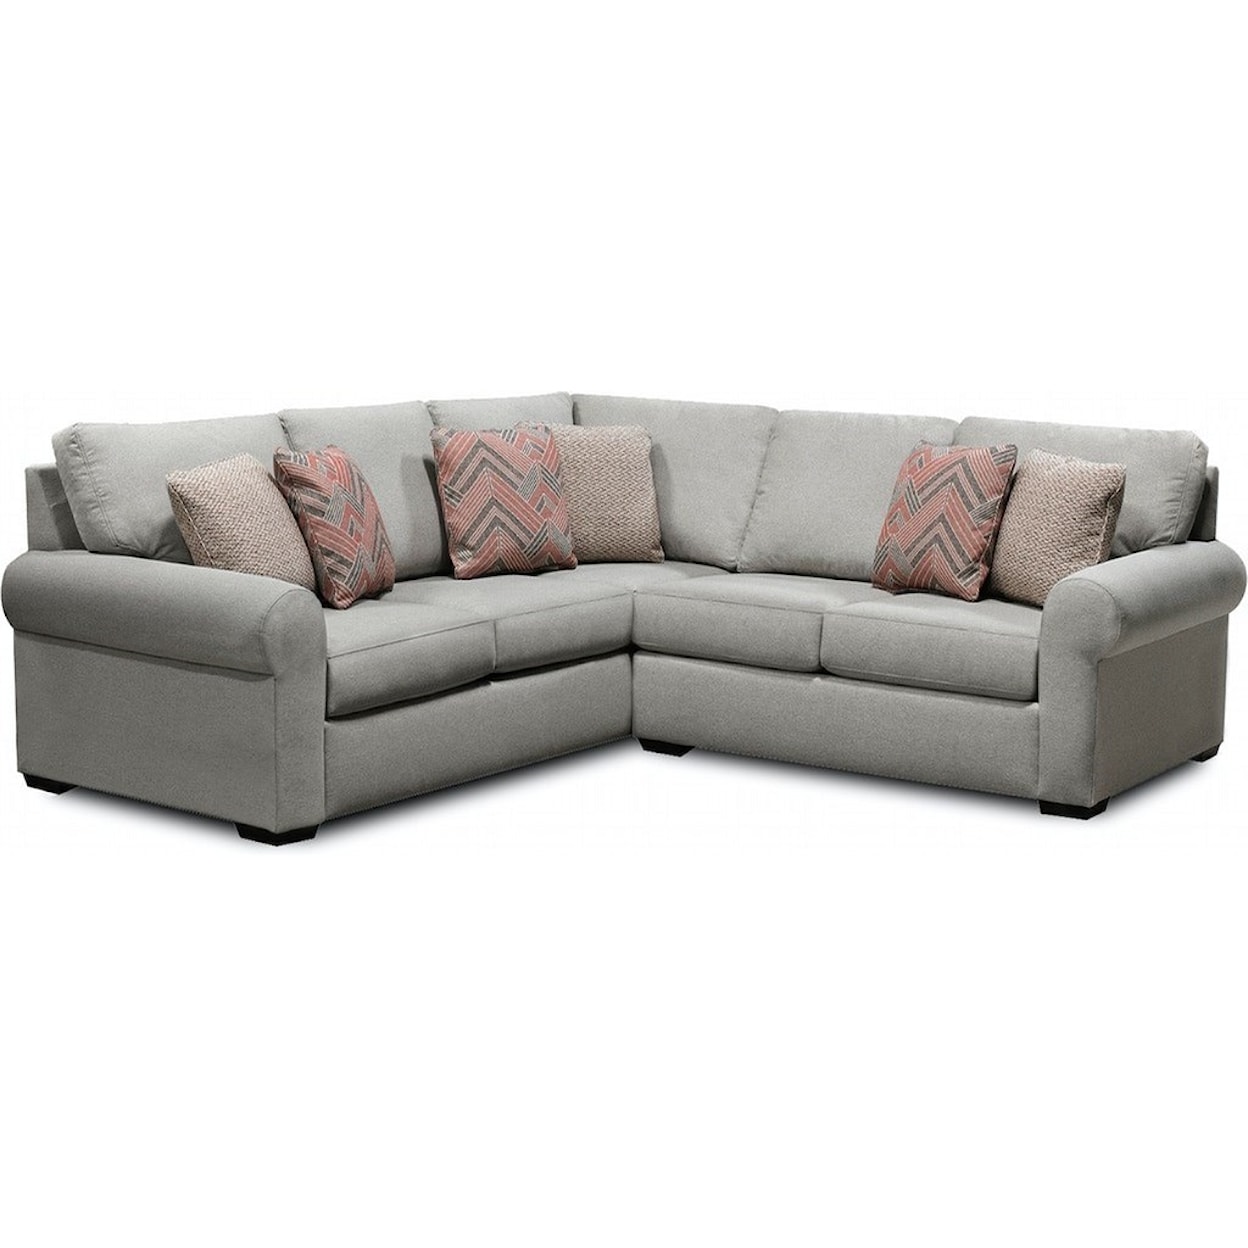 England 2650 Series Sectional